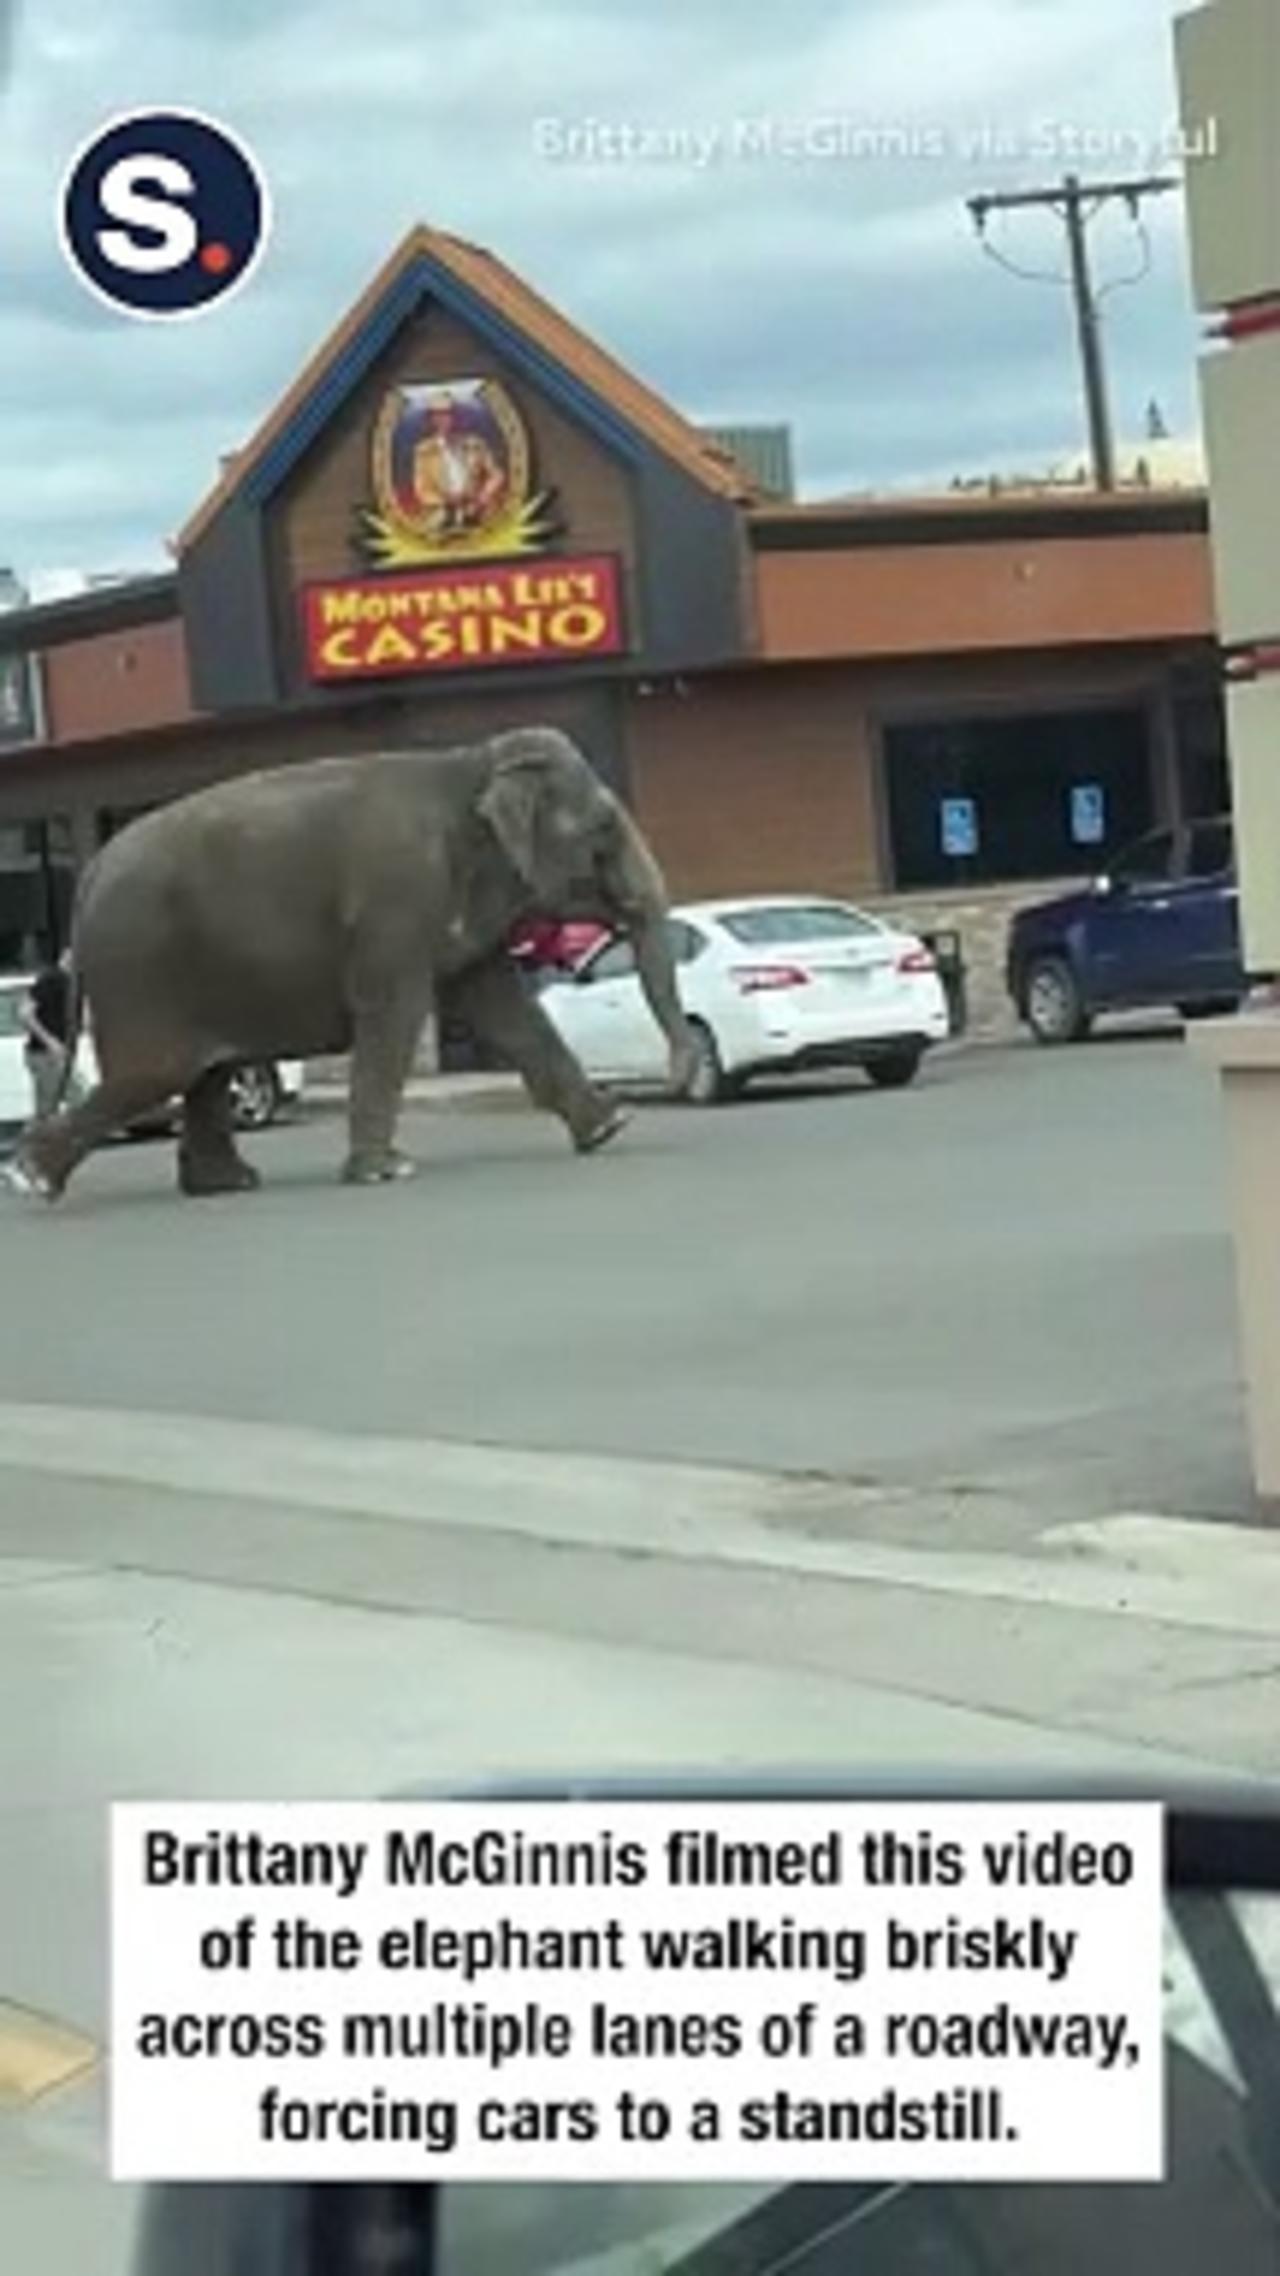 Elephant Stops Traffic in Butte After Escaping Circus